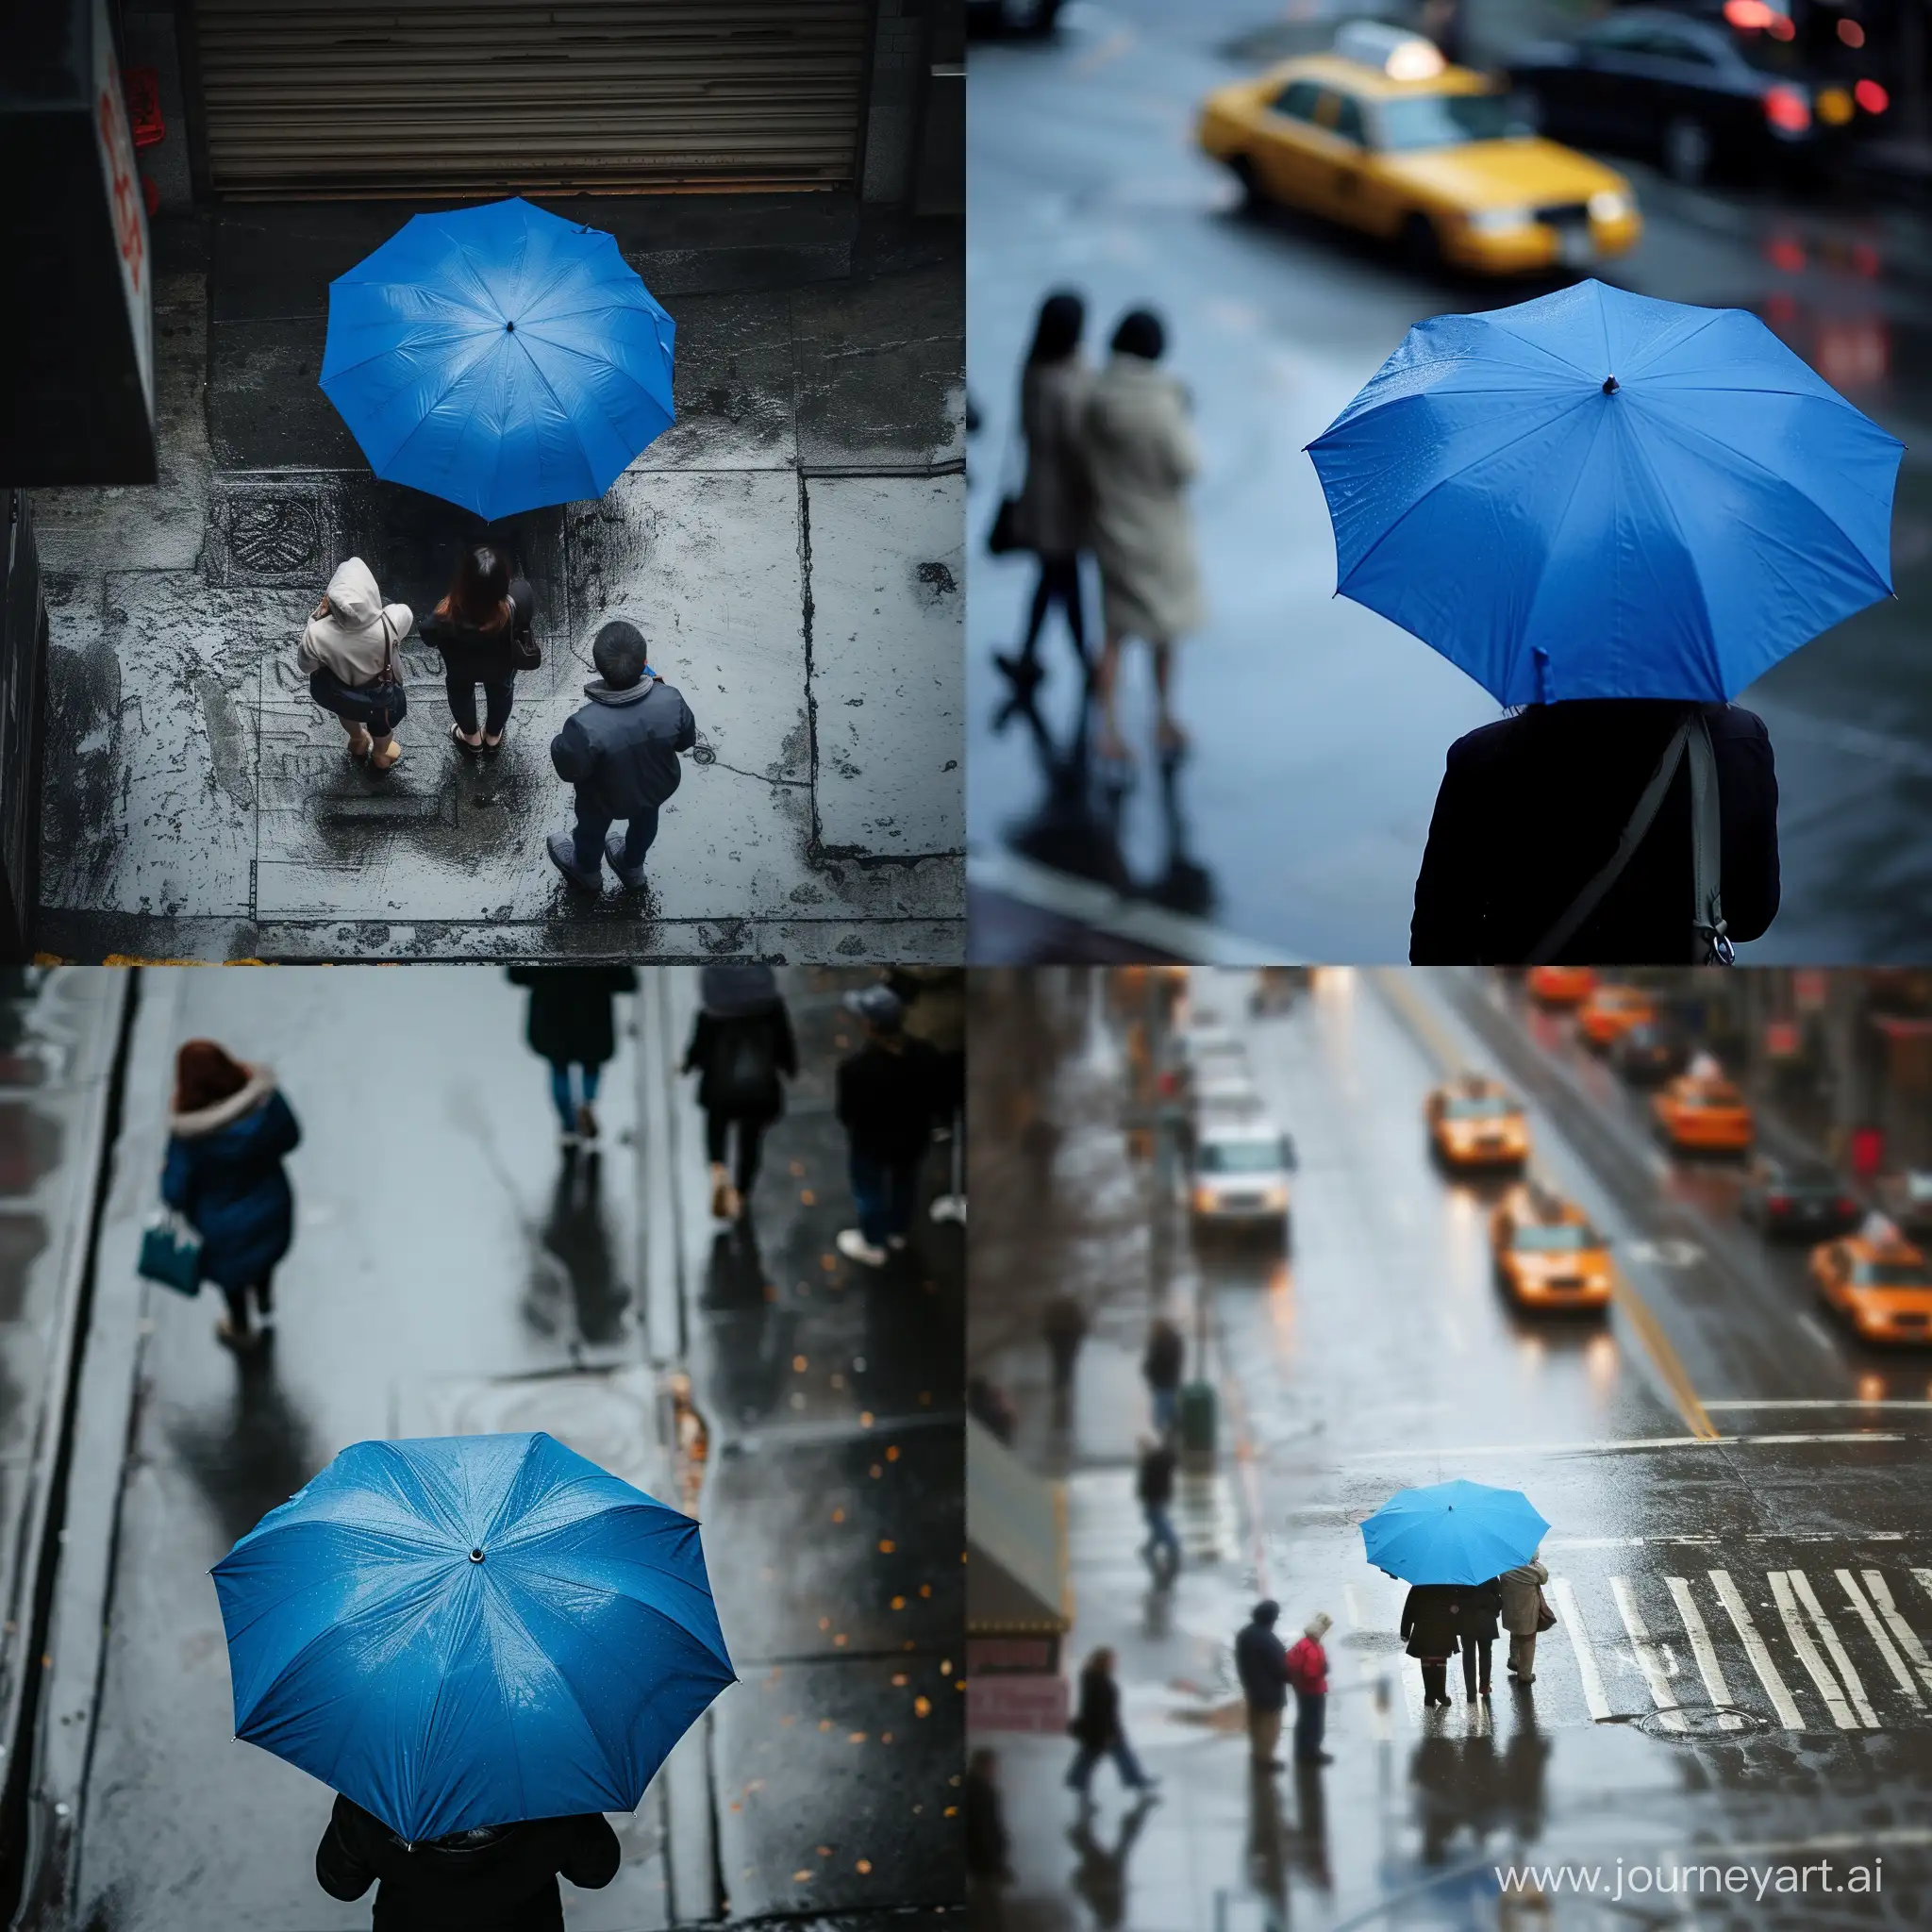 people under a blue umbrella on the street from afar